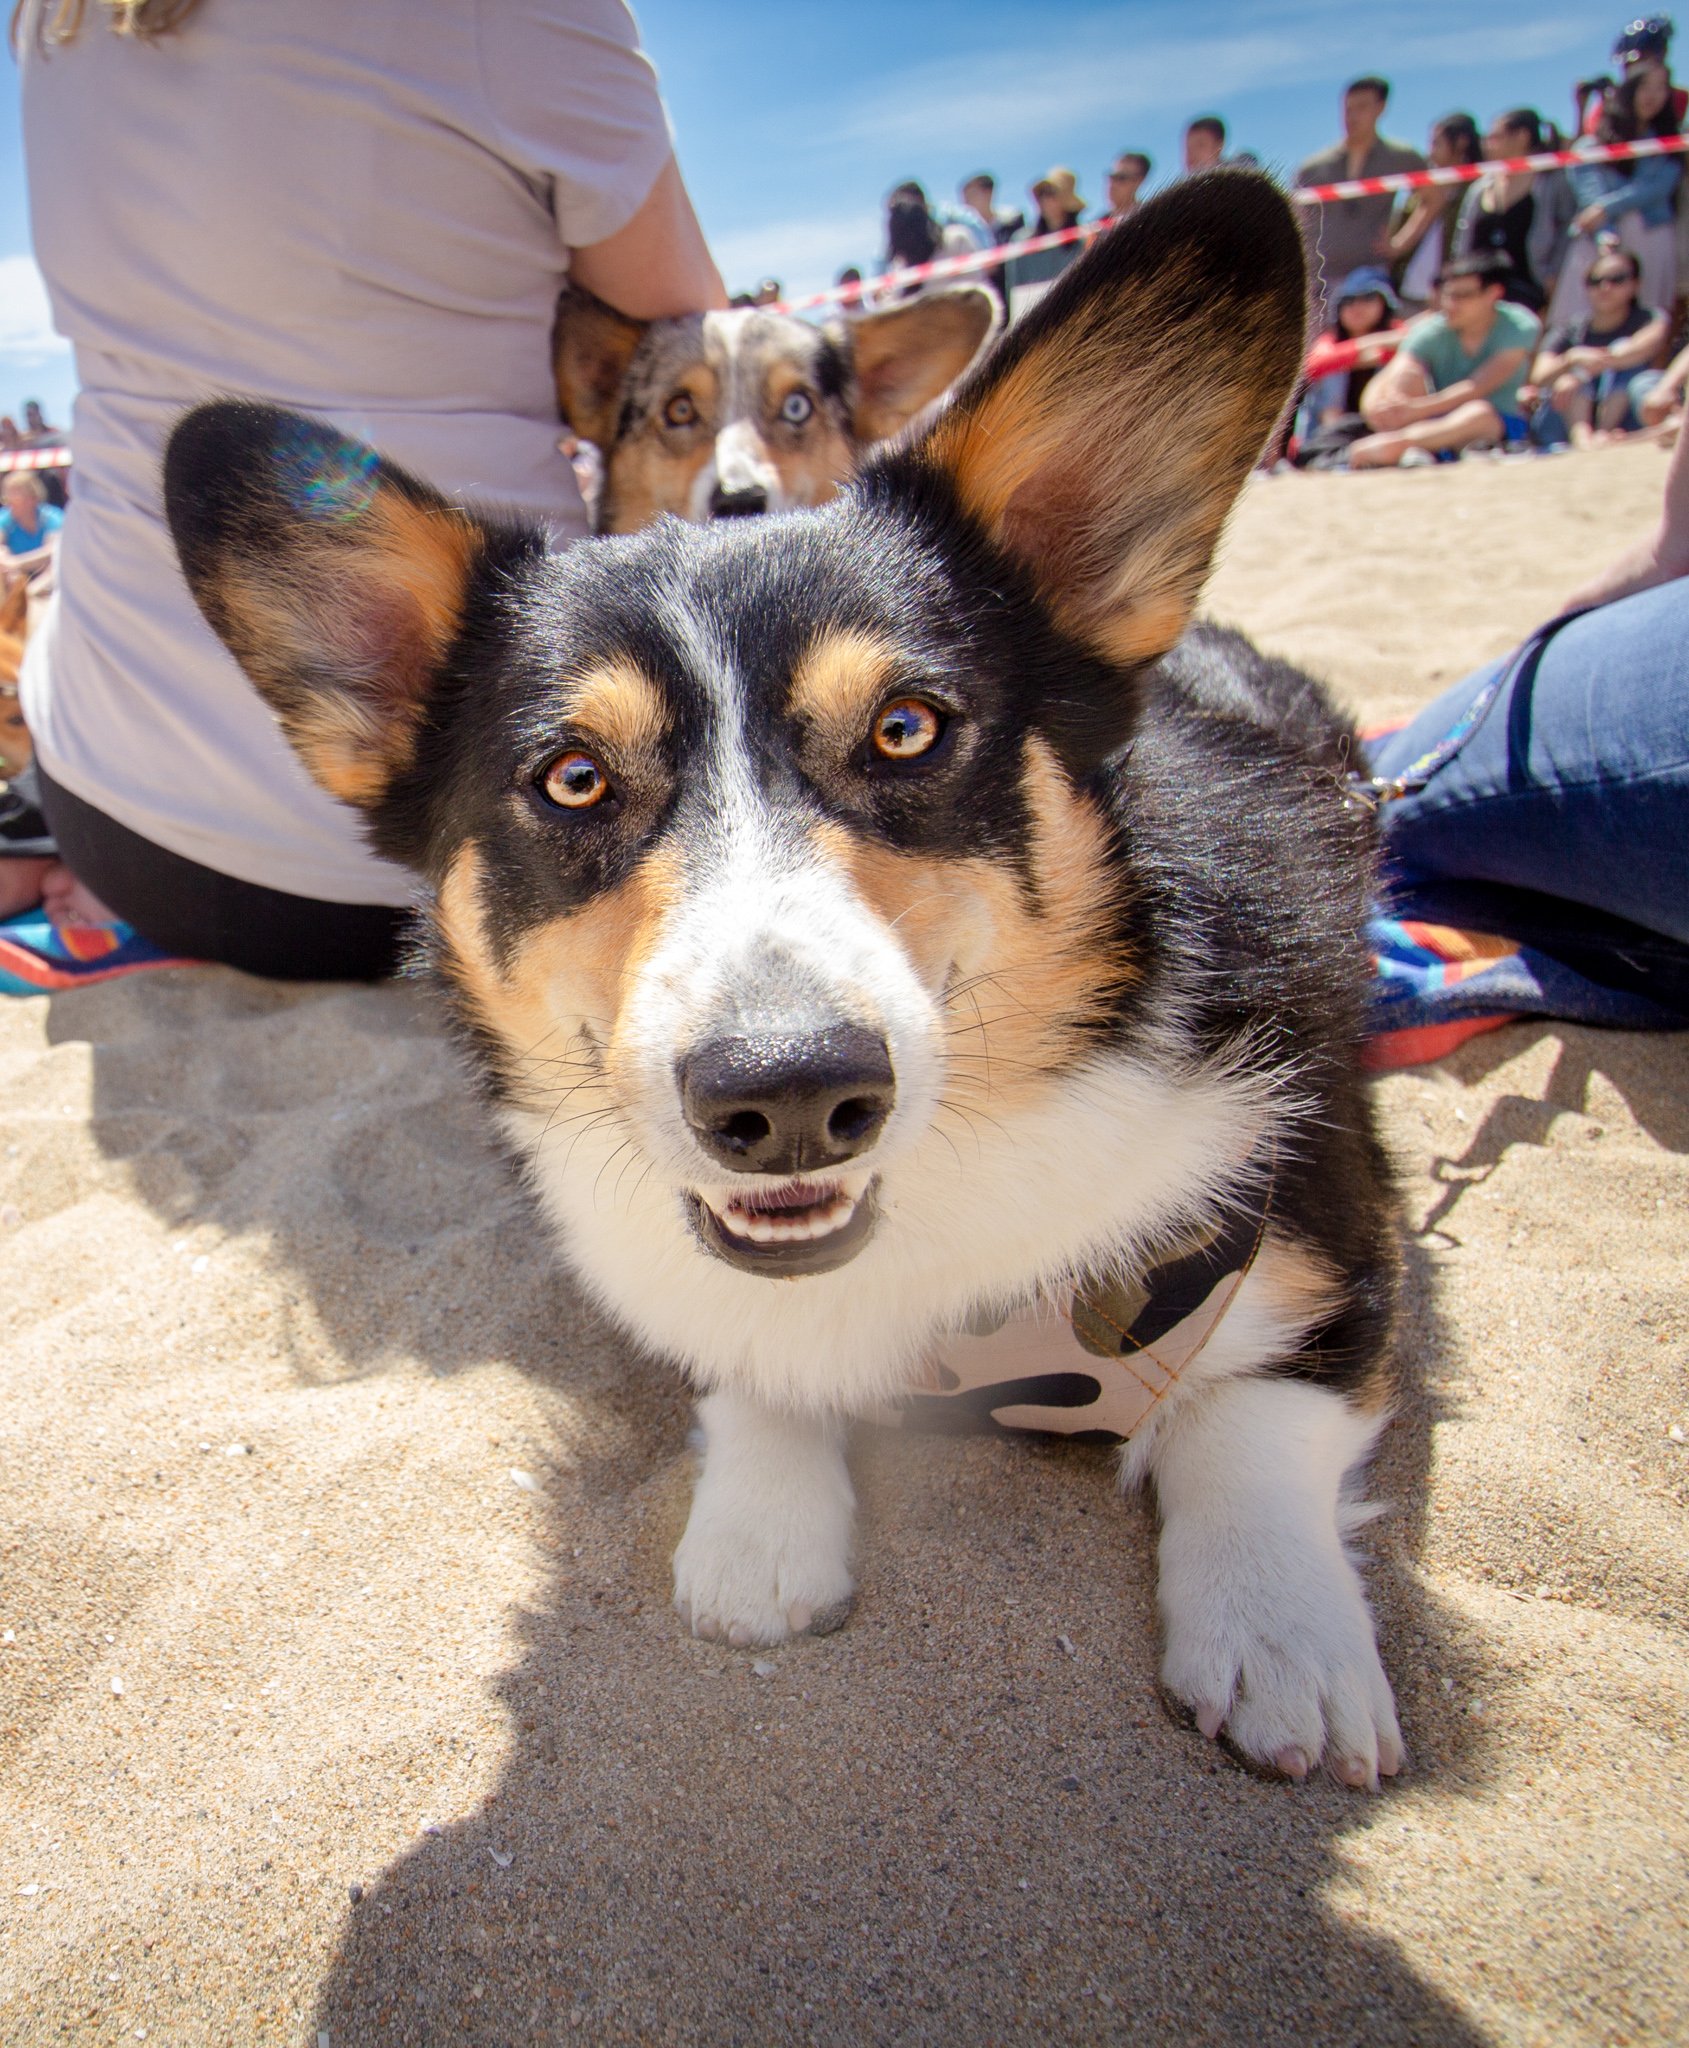 Orange County Pet and Dog Photography - by Steamer Lee - Corgi Beach Day Spring 2019 - Southern Caliornia 09 (1).JPG